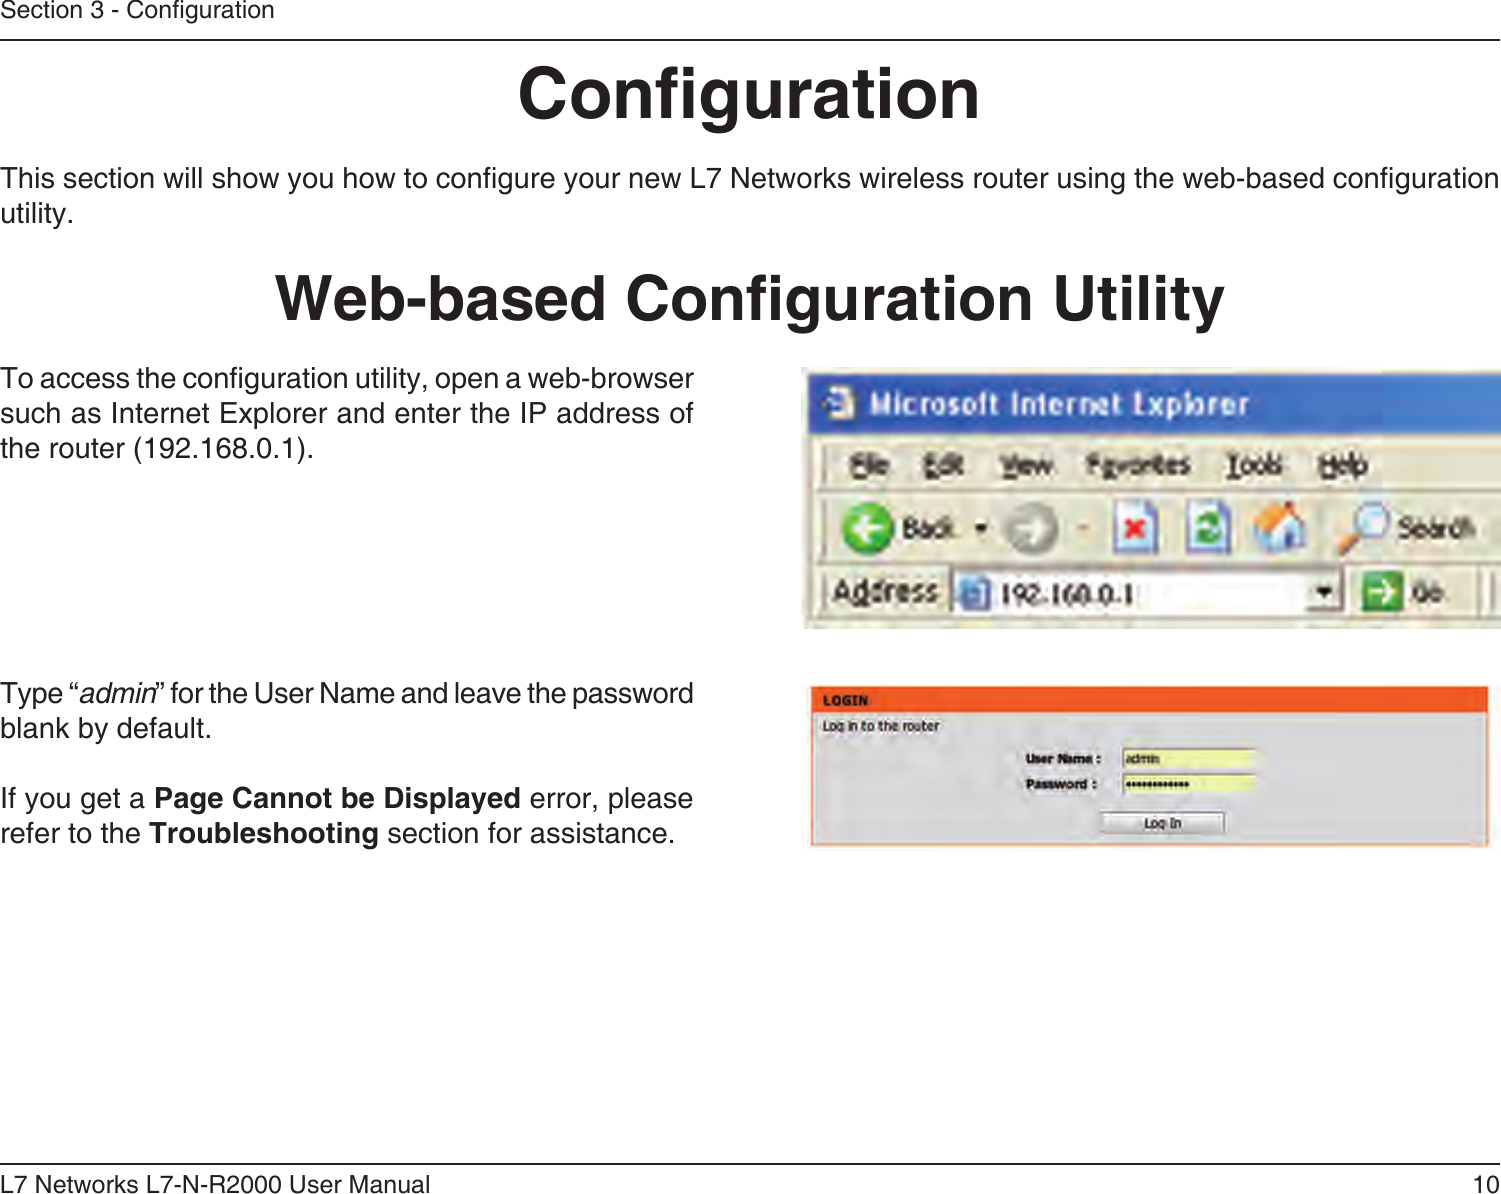 10L7 Networks L7-N-R2000 User ManualSection 3 - CongurationCongurationThis section will show you how to congure your new L7 Networks wireless router using the web-based conguration utility.Web-based Conguration UtilityTo access the conguration utility, open a web-browser such as Internet Explorer and enter the IP address of the router (192.168.0.1).Type “admin” for the User Name and leave the password blank by default.If you get a Page Cannot be Displayed error, please refer to the Troubleshooting section for assistance.